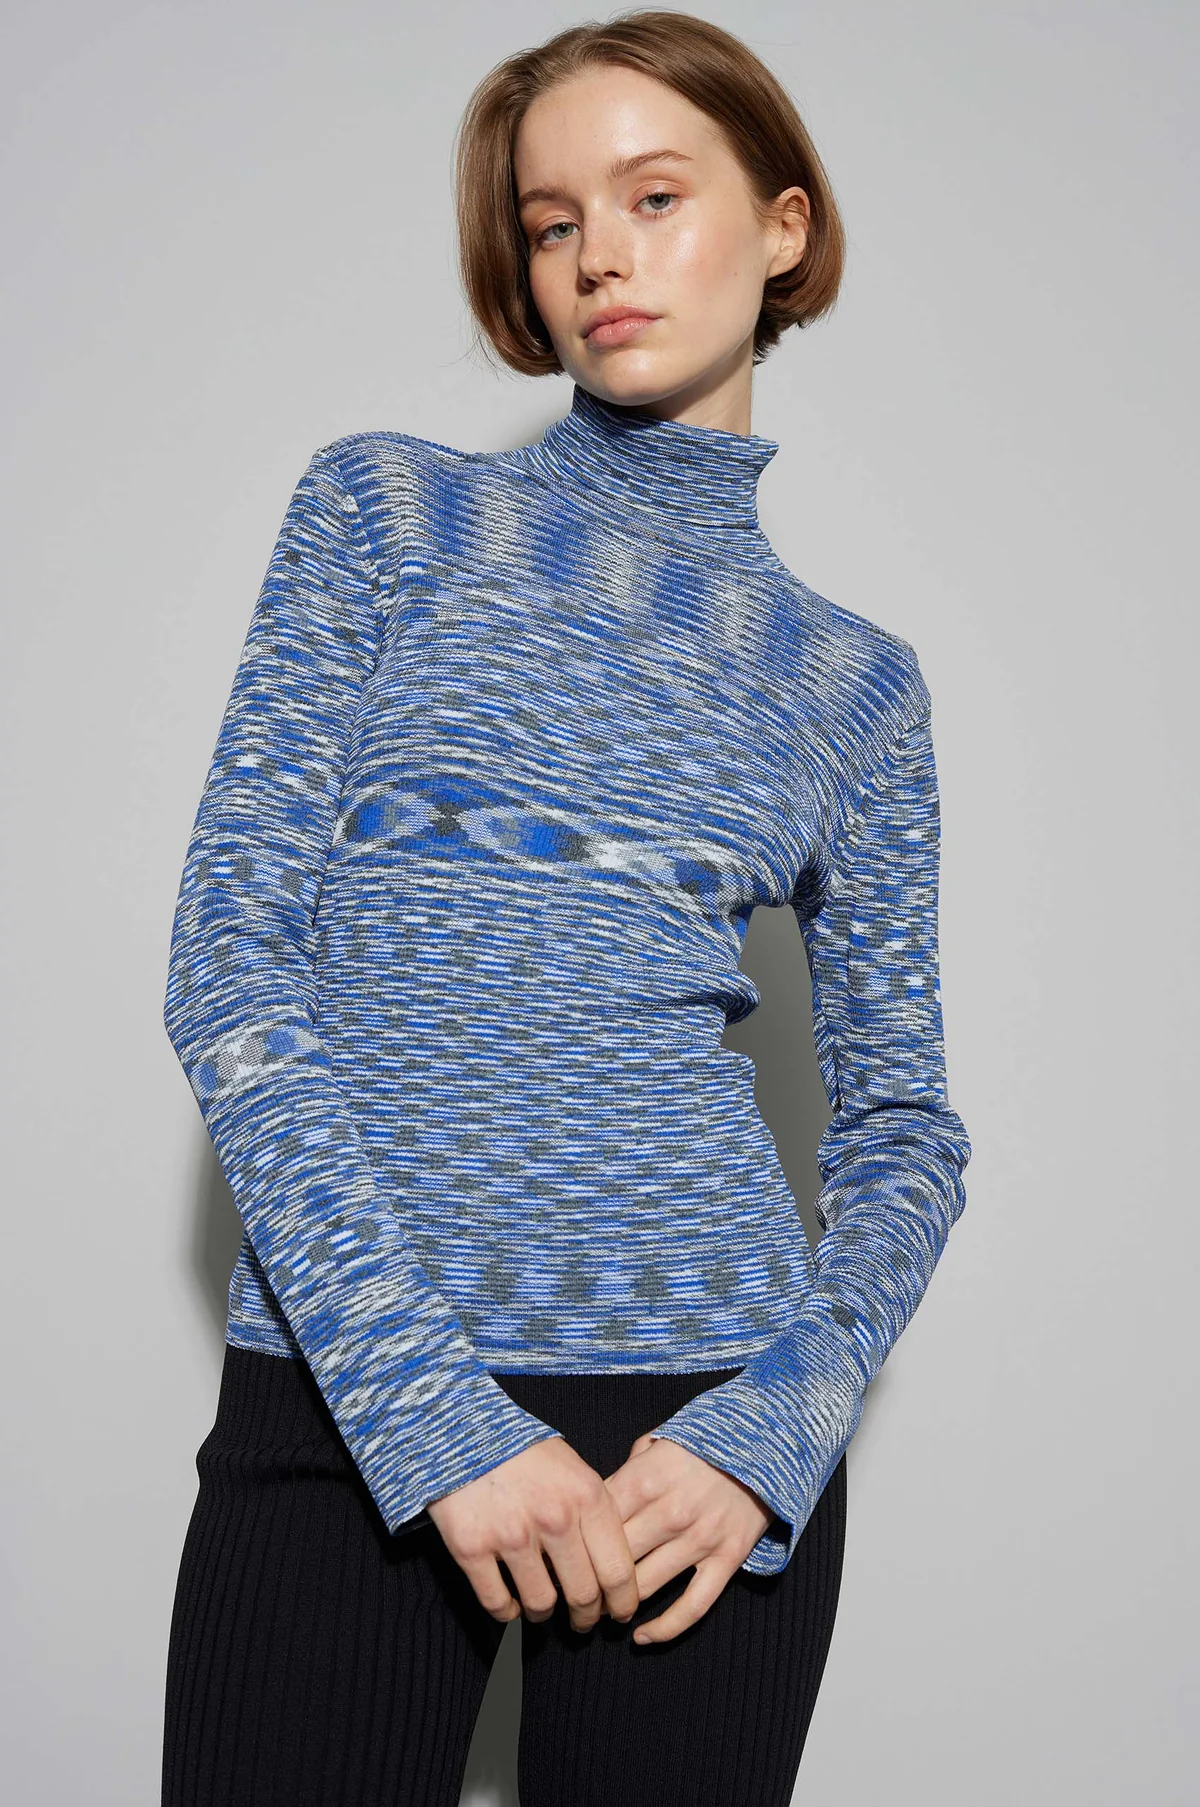 OVAL SQUARE Pool/knit t-neck